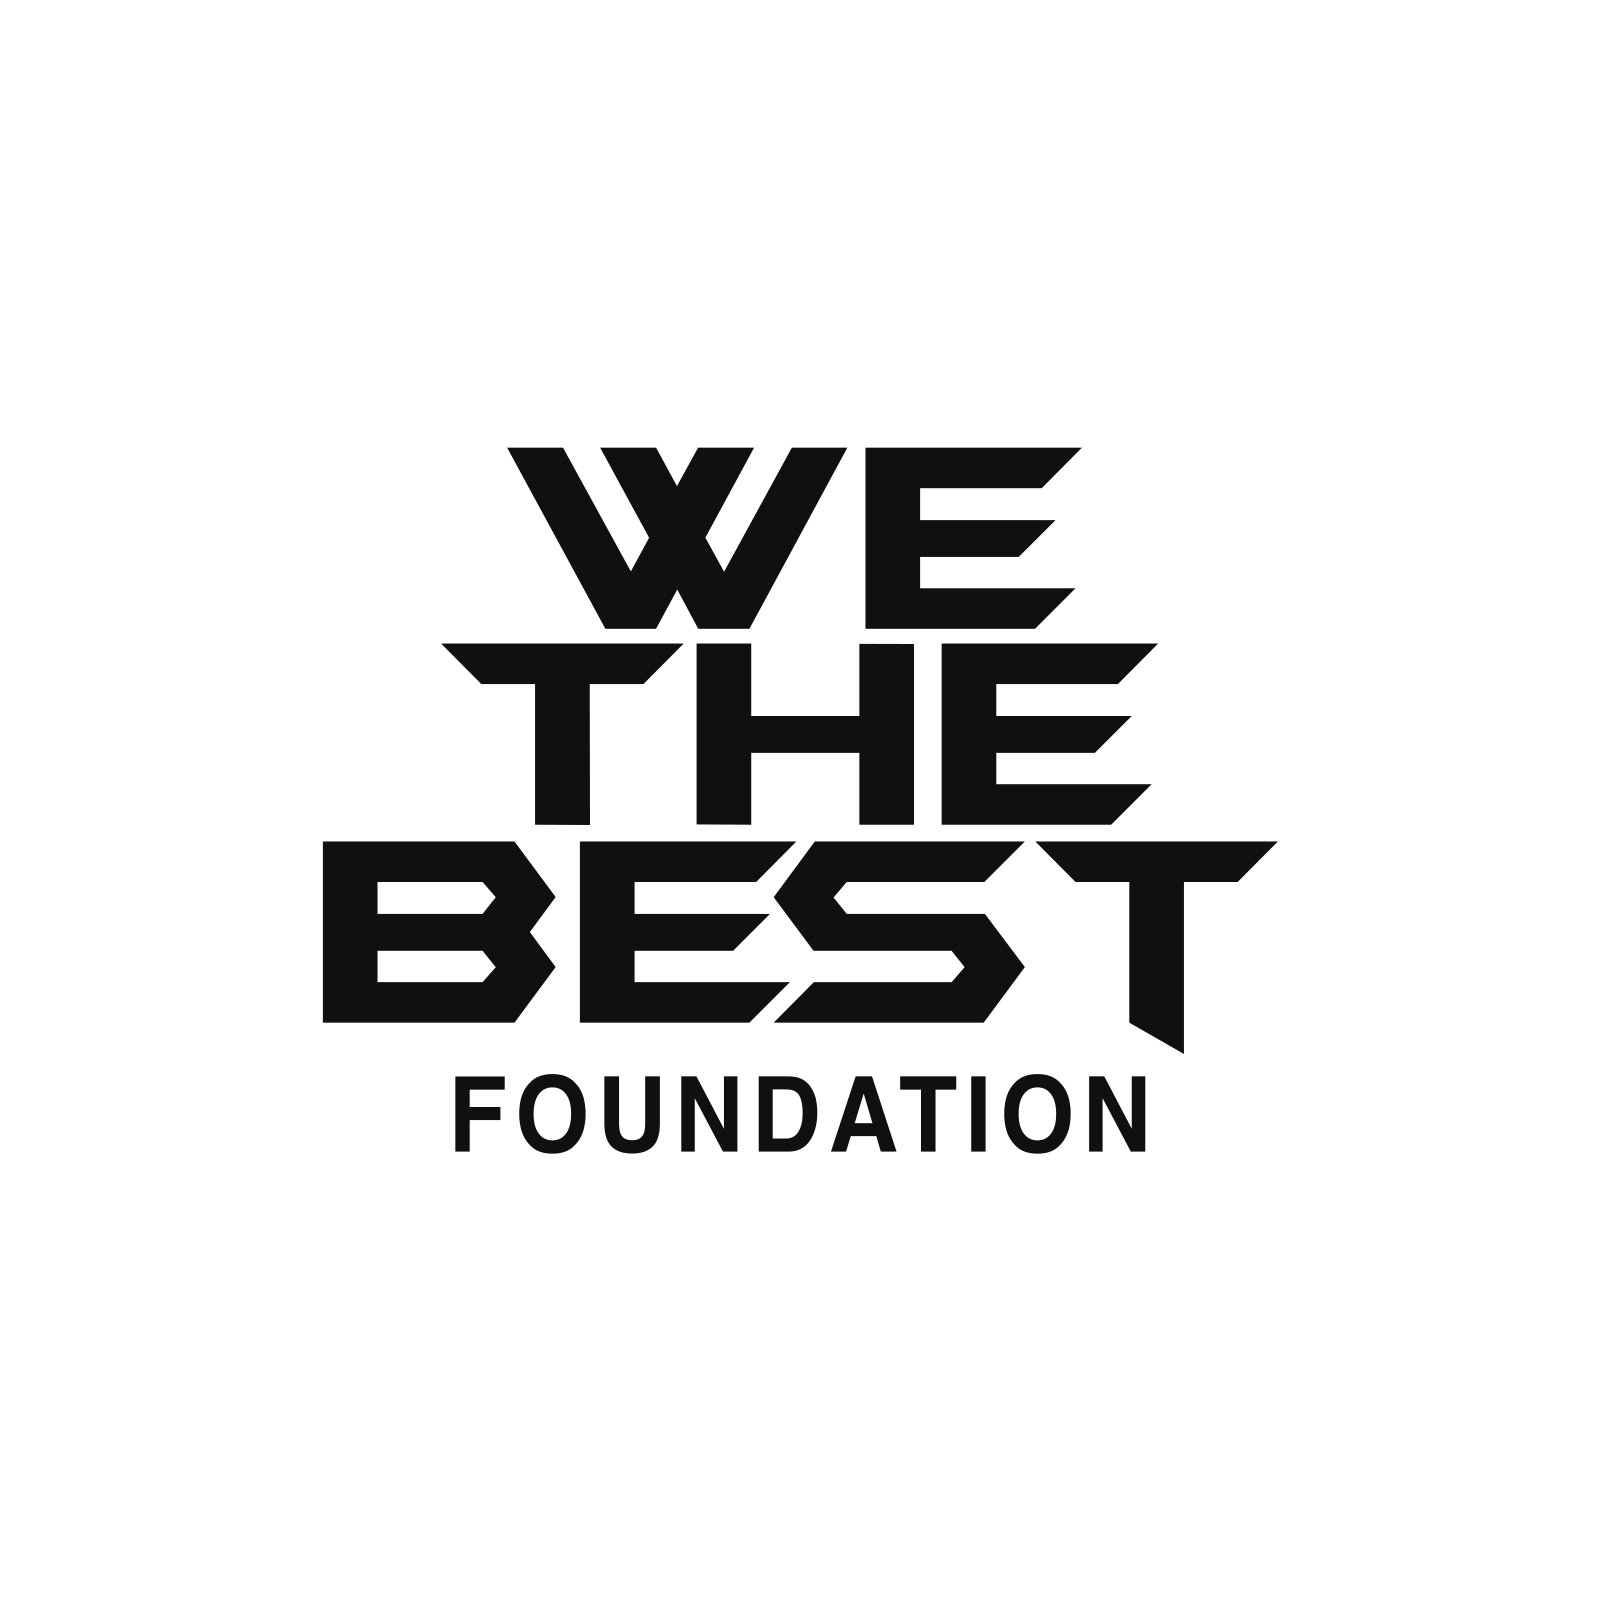 We The Best Foundation is a 501c3 organization founded by the Khaled family dedicated to enriching the lives of the next generation.